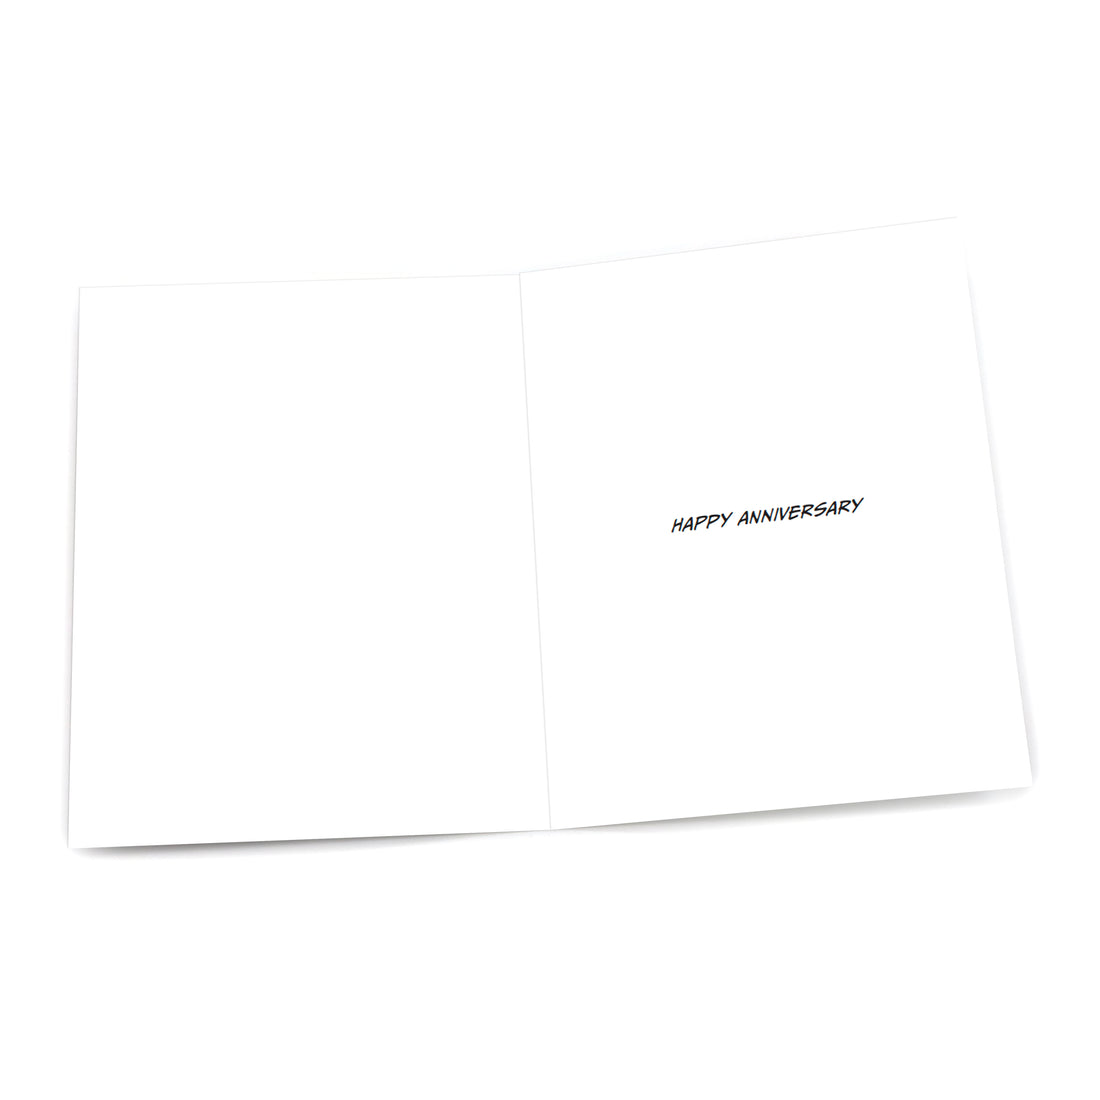 Greeting Card: Pop Life, This is Turning Into the Longest One Night stand Ever - Pack of 6